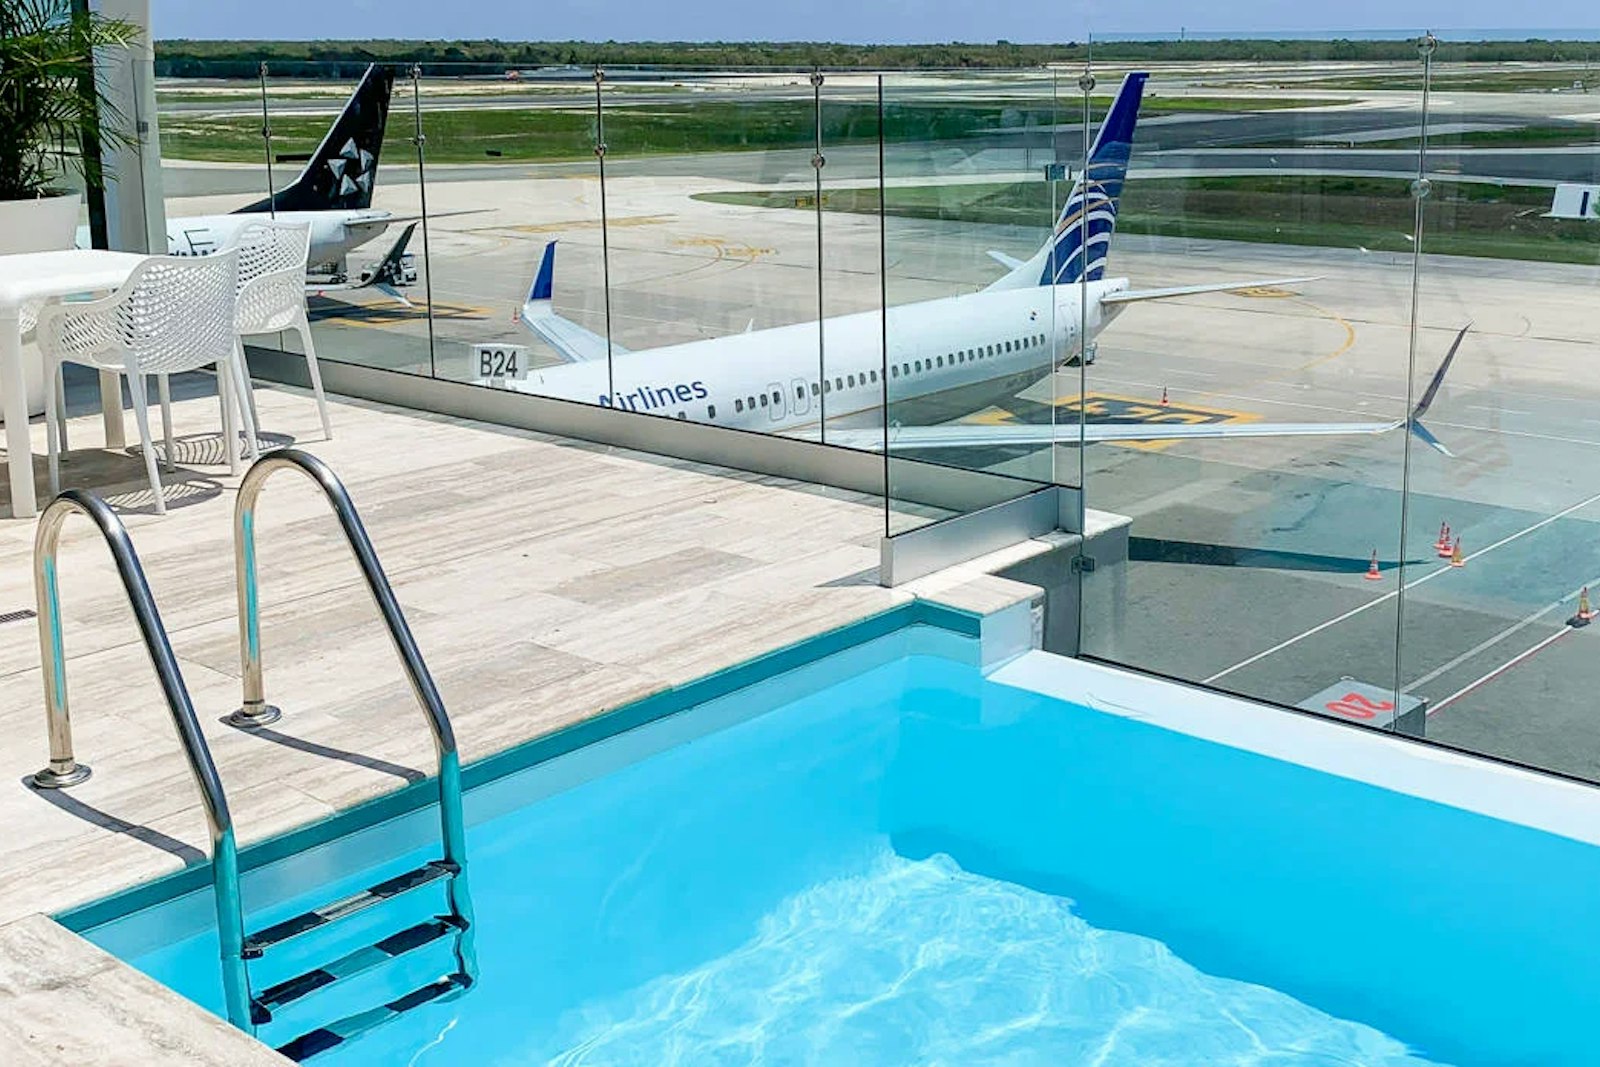 The right cards can gain you access to the best lounges, like the Priority Pass lounge in Punta Cana Airport where you can wait to board while wading in a pool